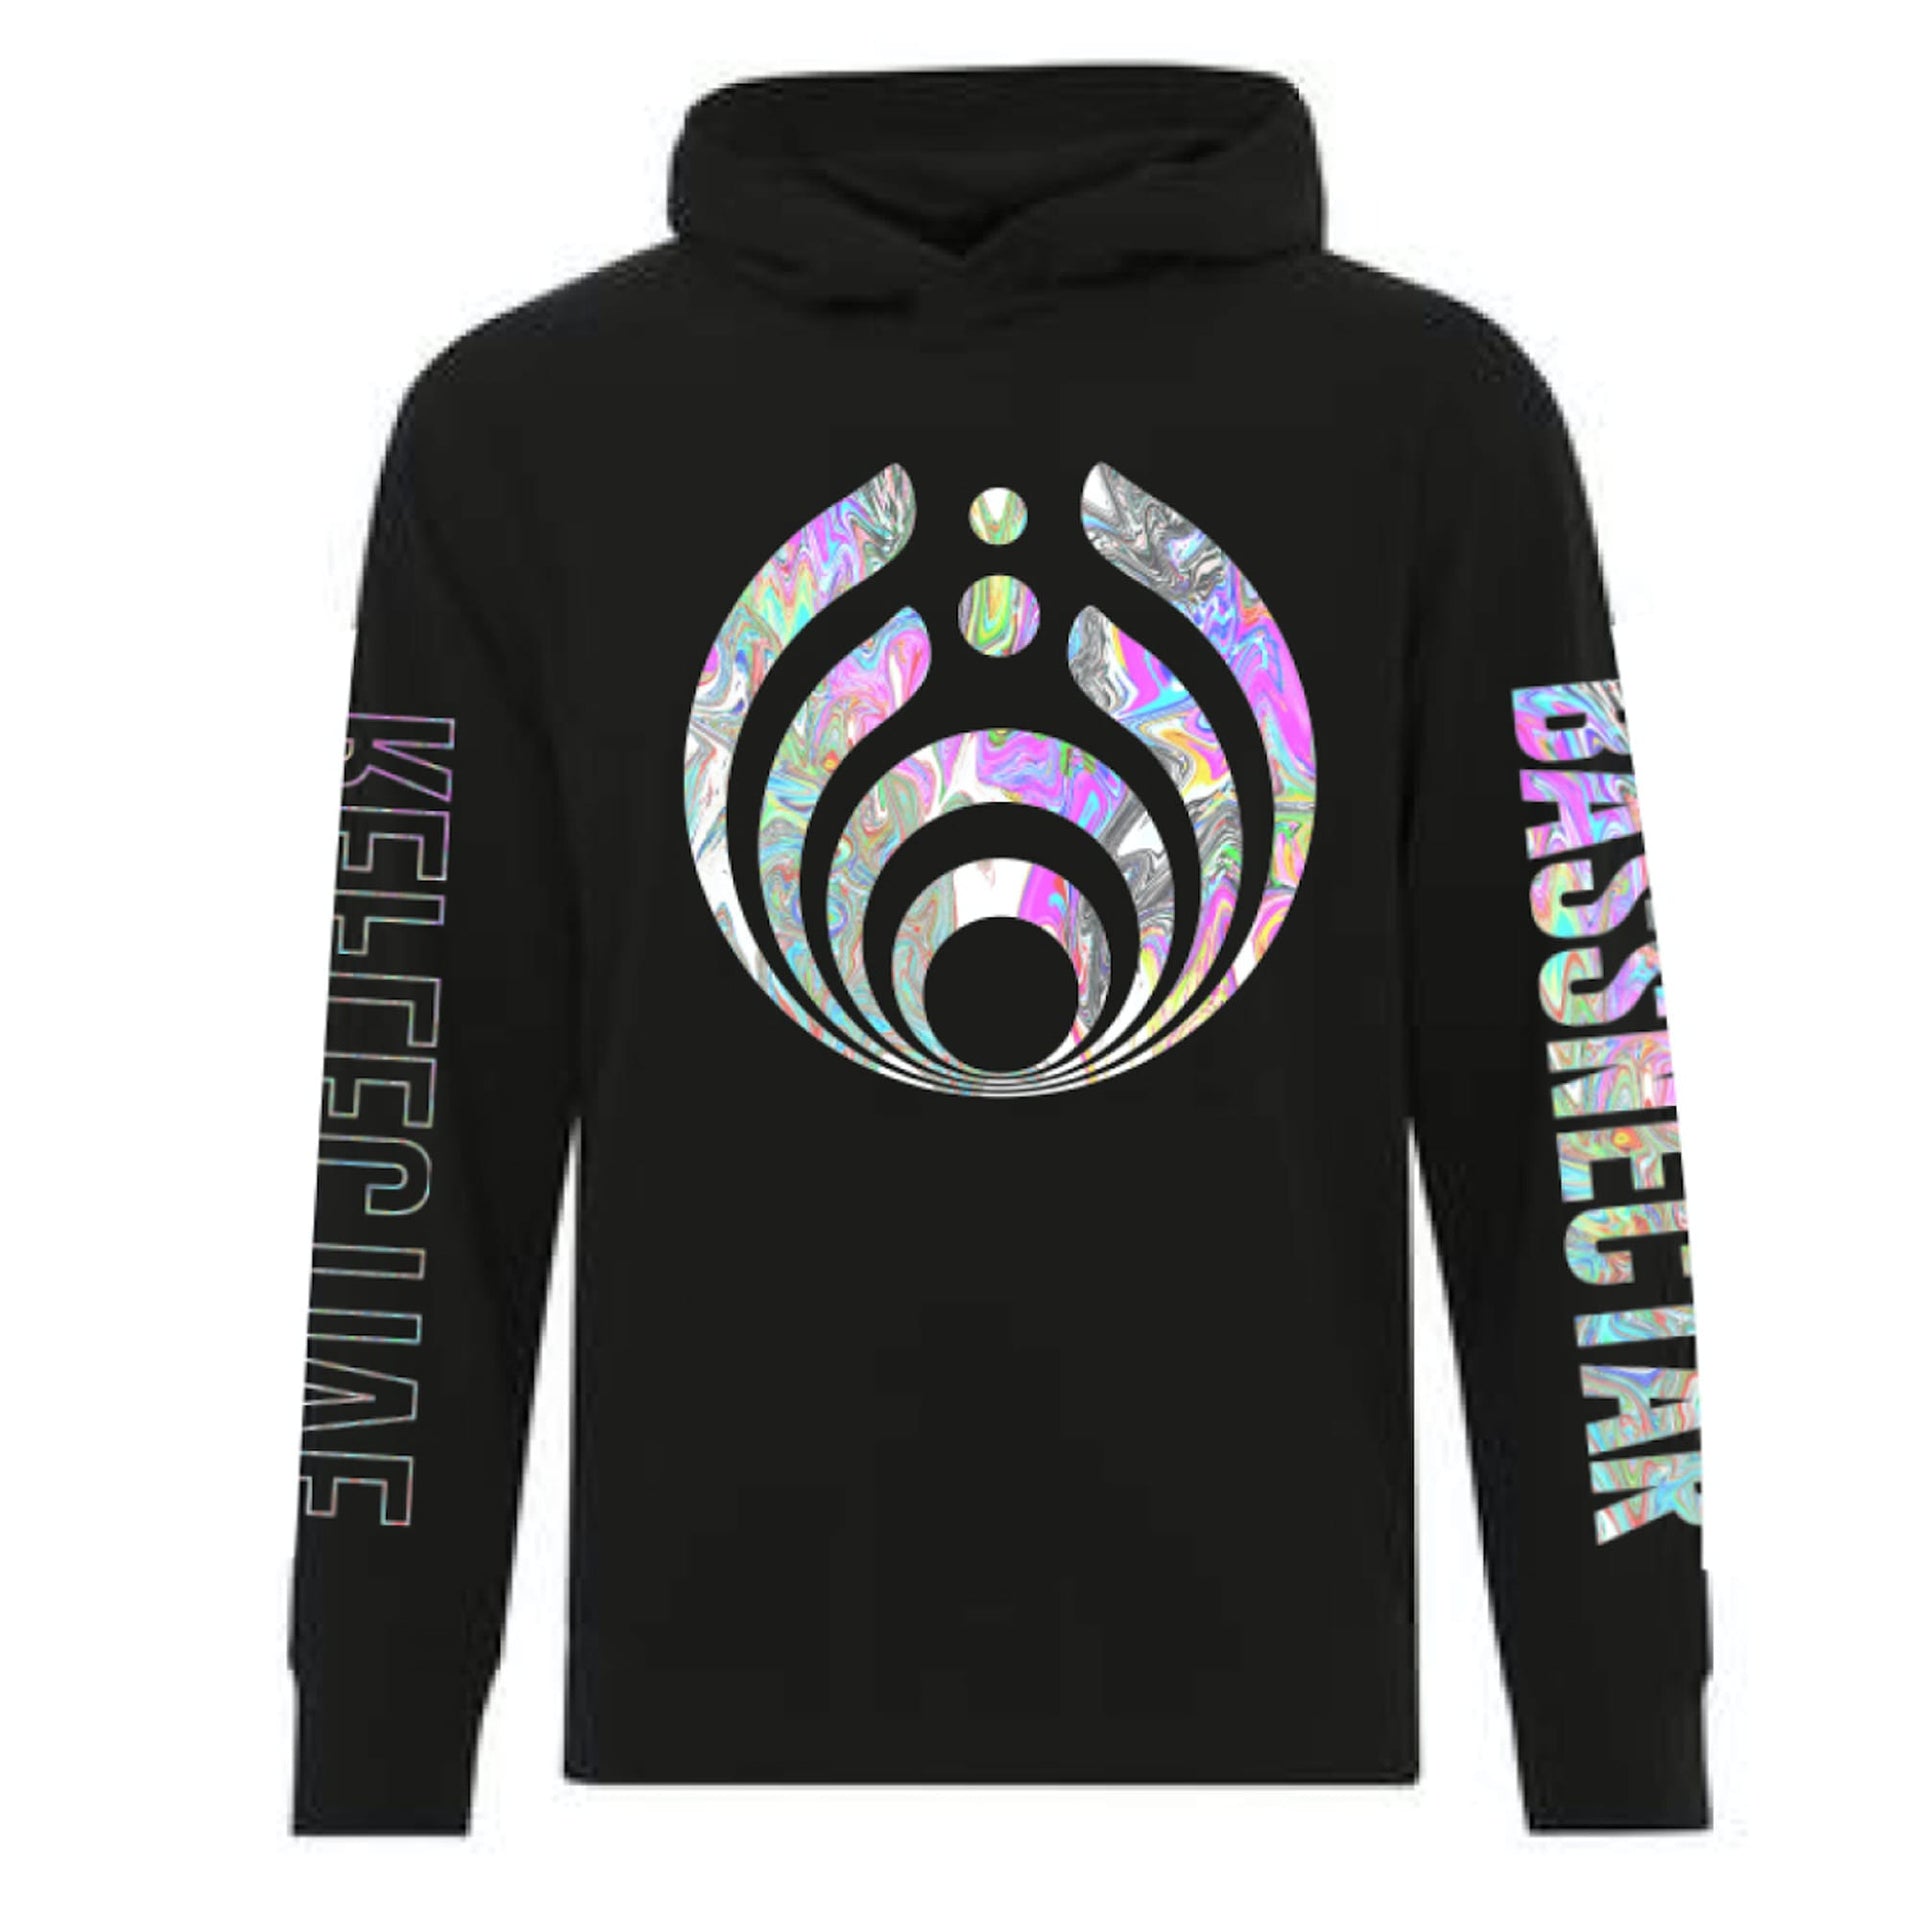 Reflective Part 2 Pullover Hoodie